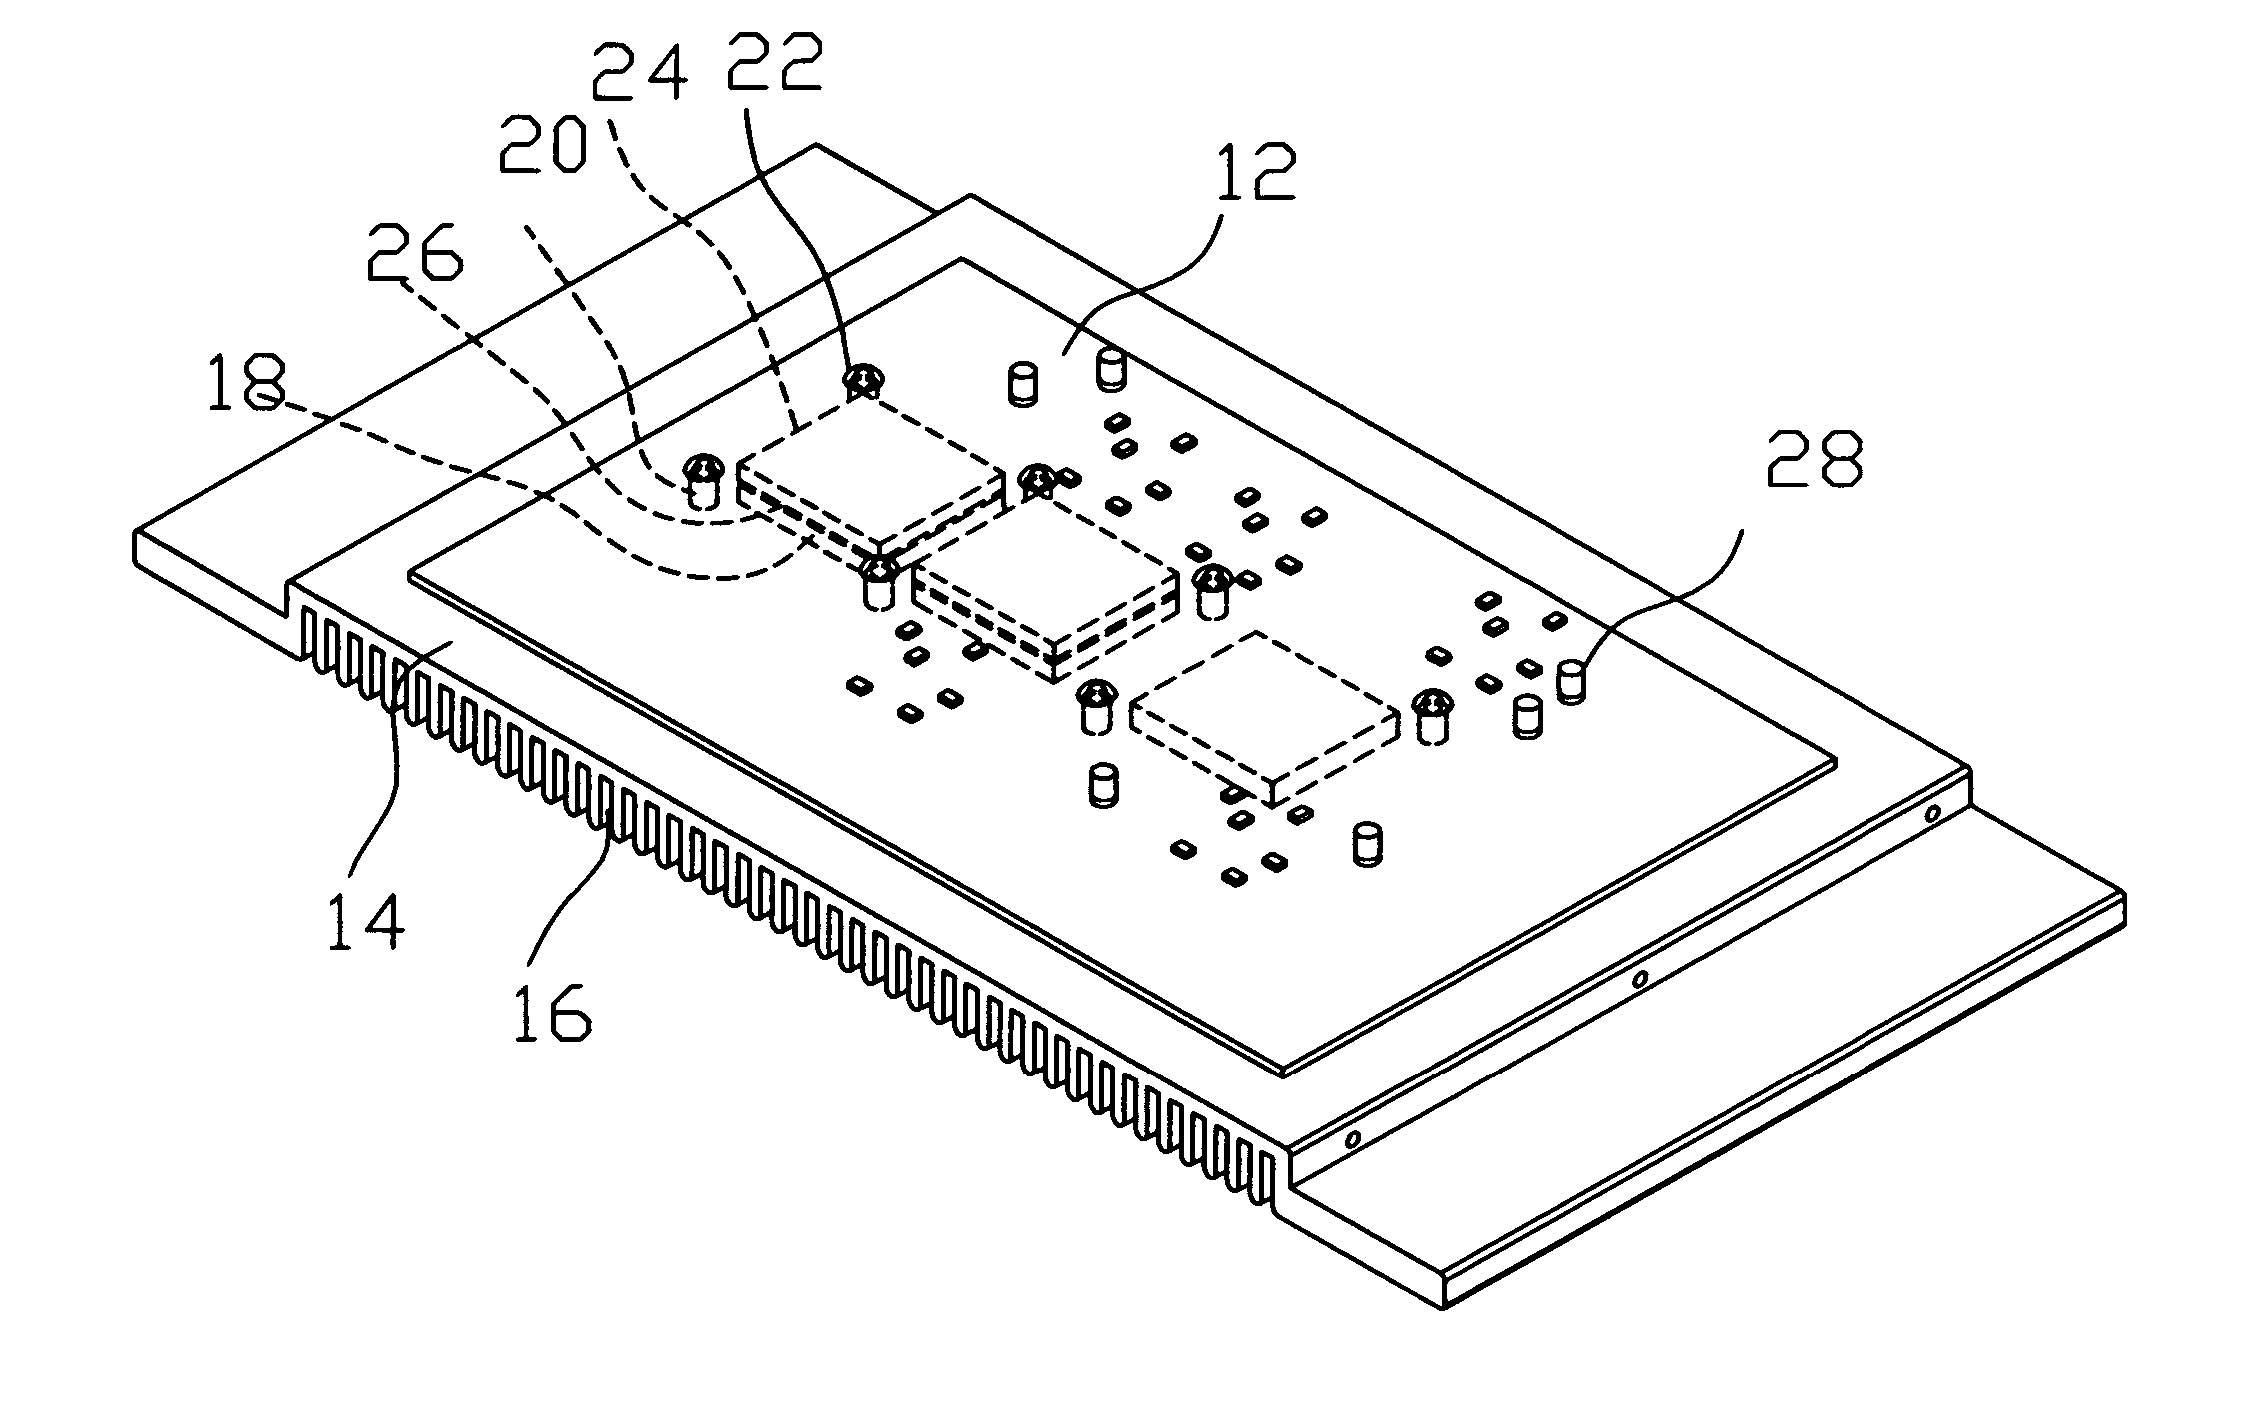 Heat dissipation structure of an electronic device